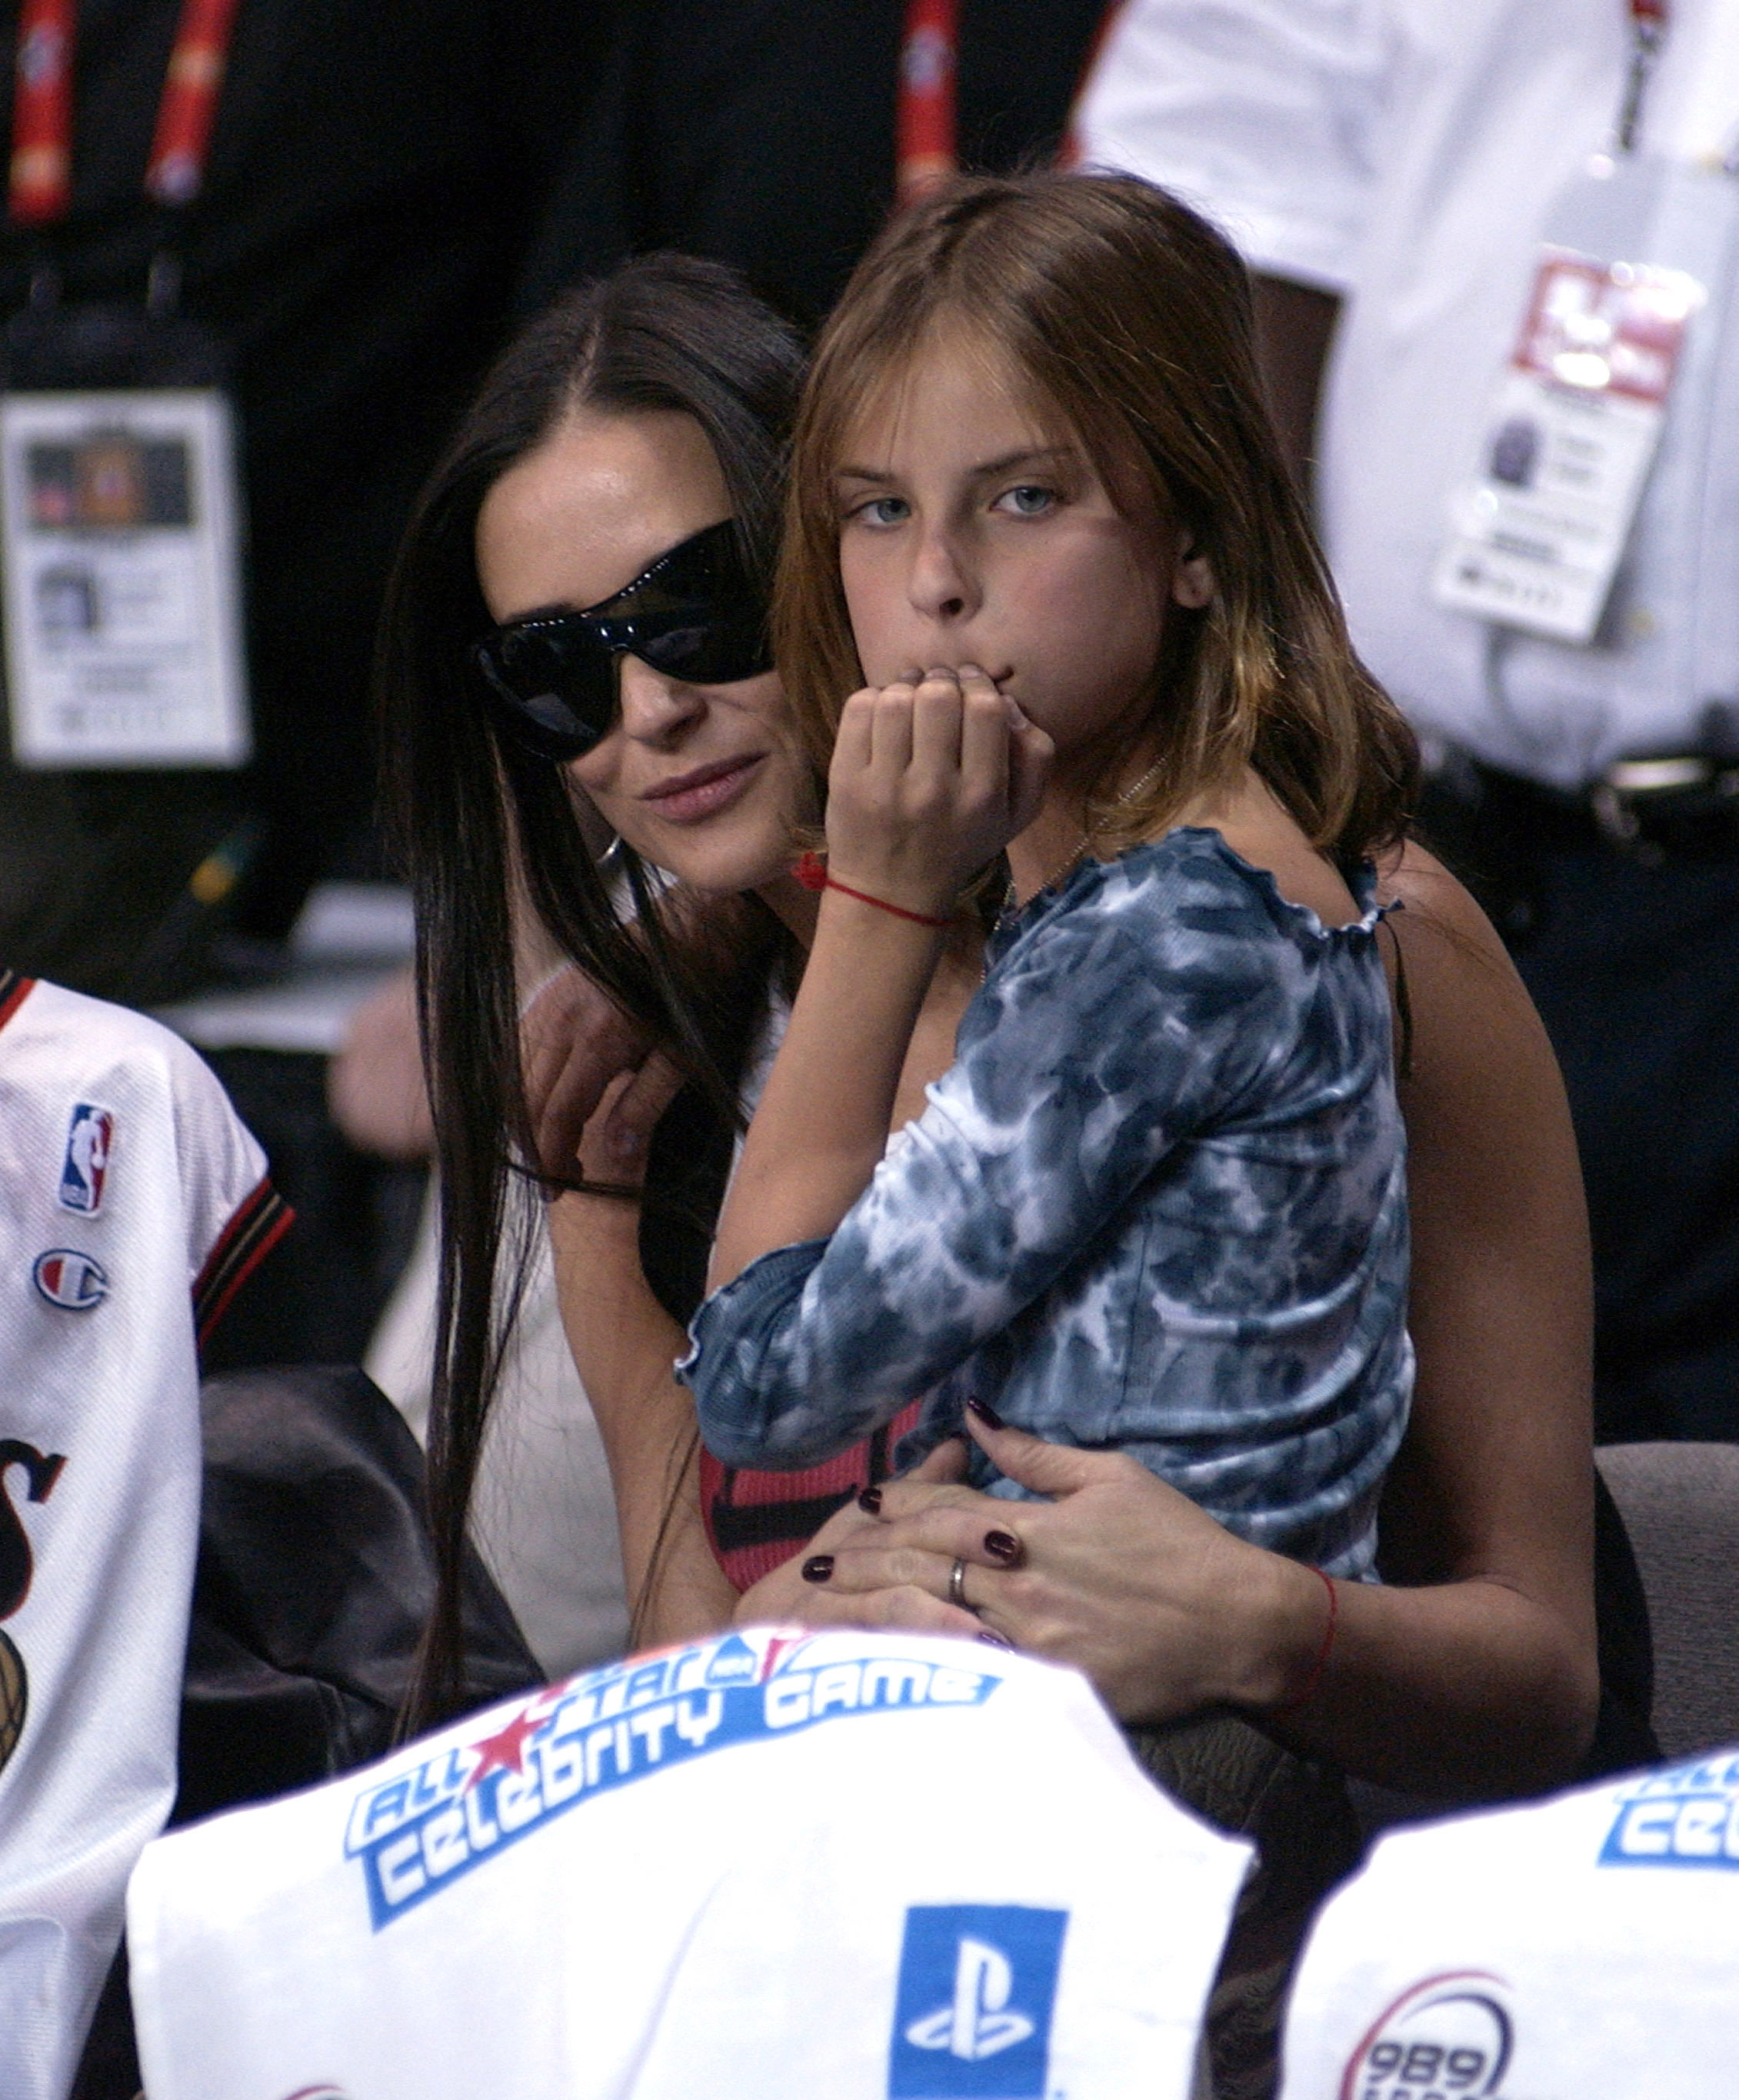 Demi Moore and her daughter Tallulah Belle Willis during the NBA All-Star Celebrity Game in Los Angeles, California, on February 14, 2004 | Source: Getty Images